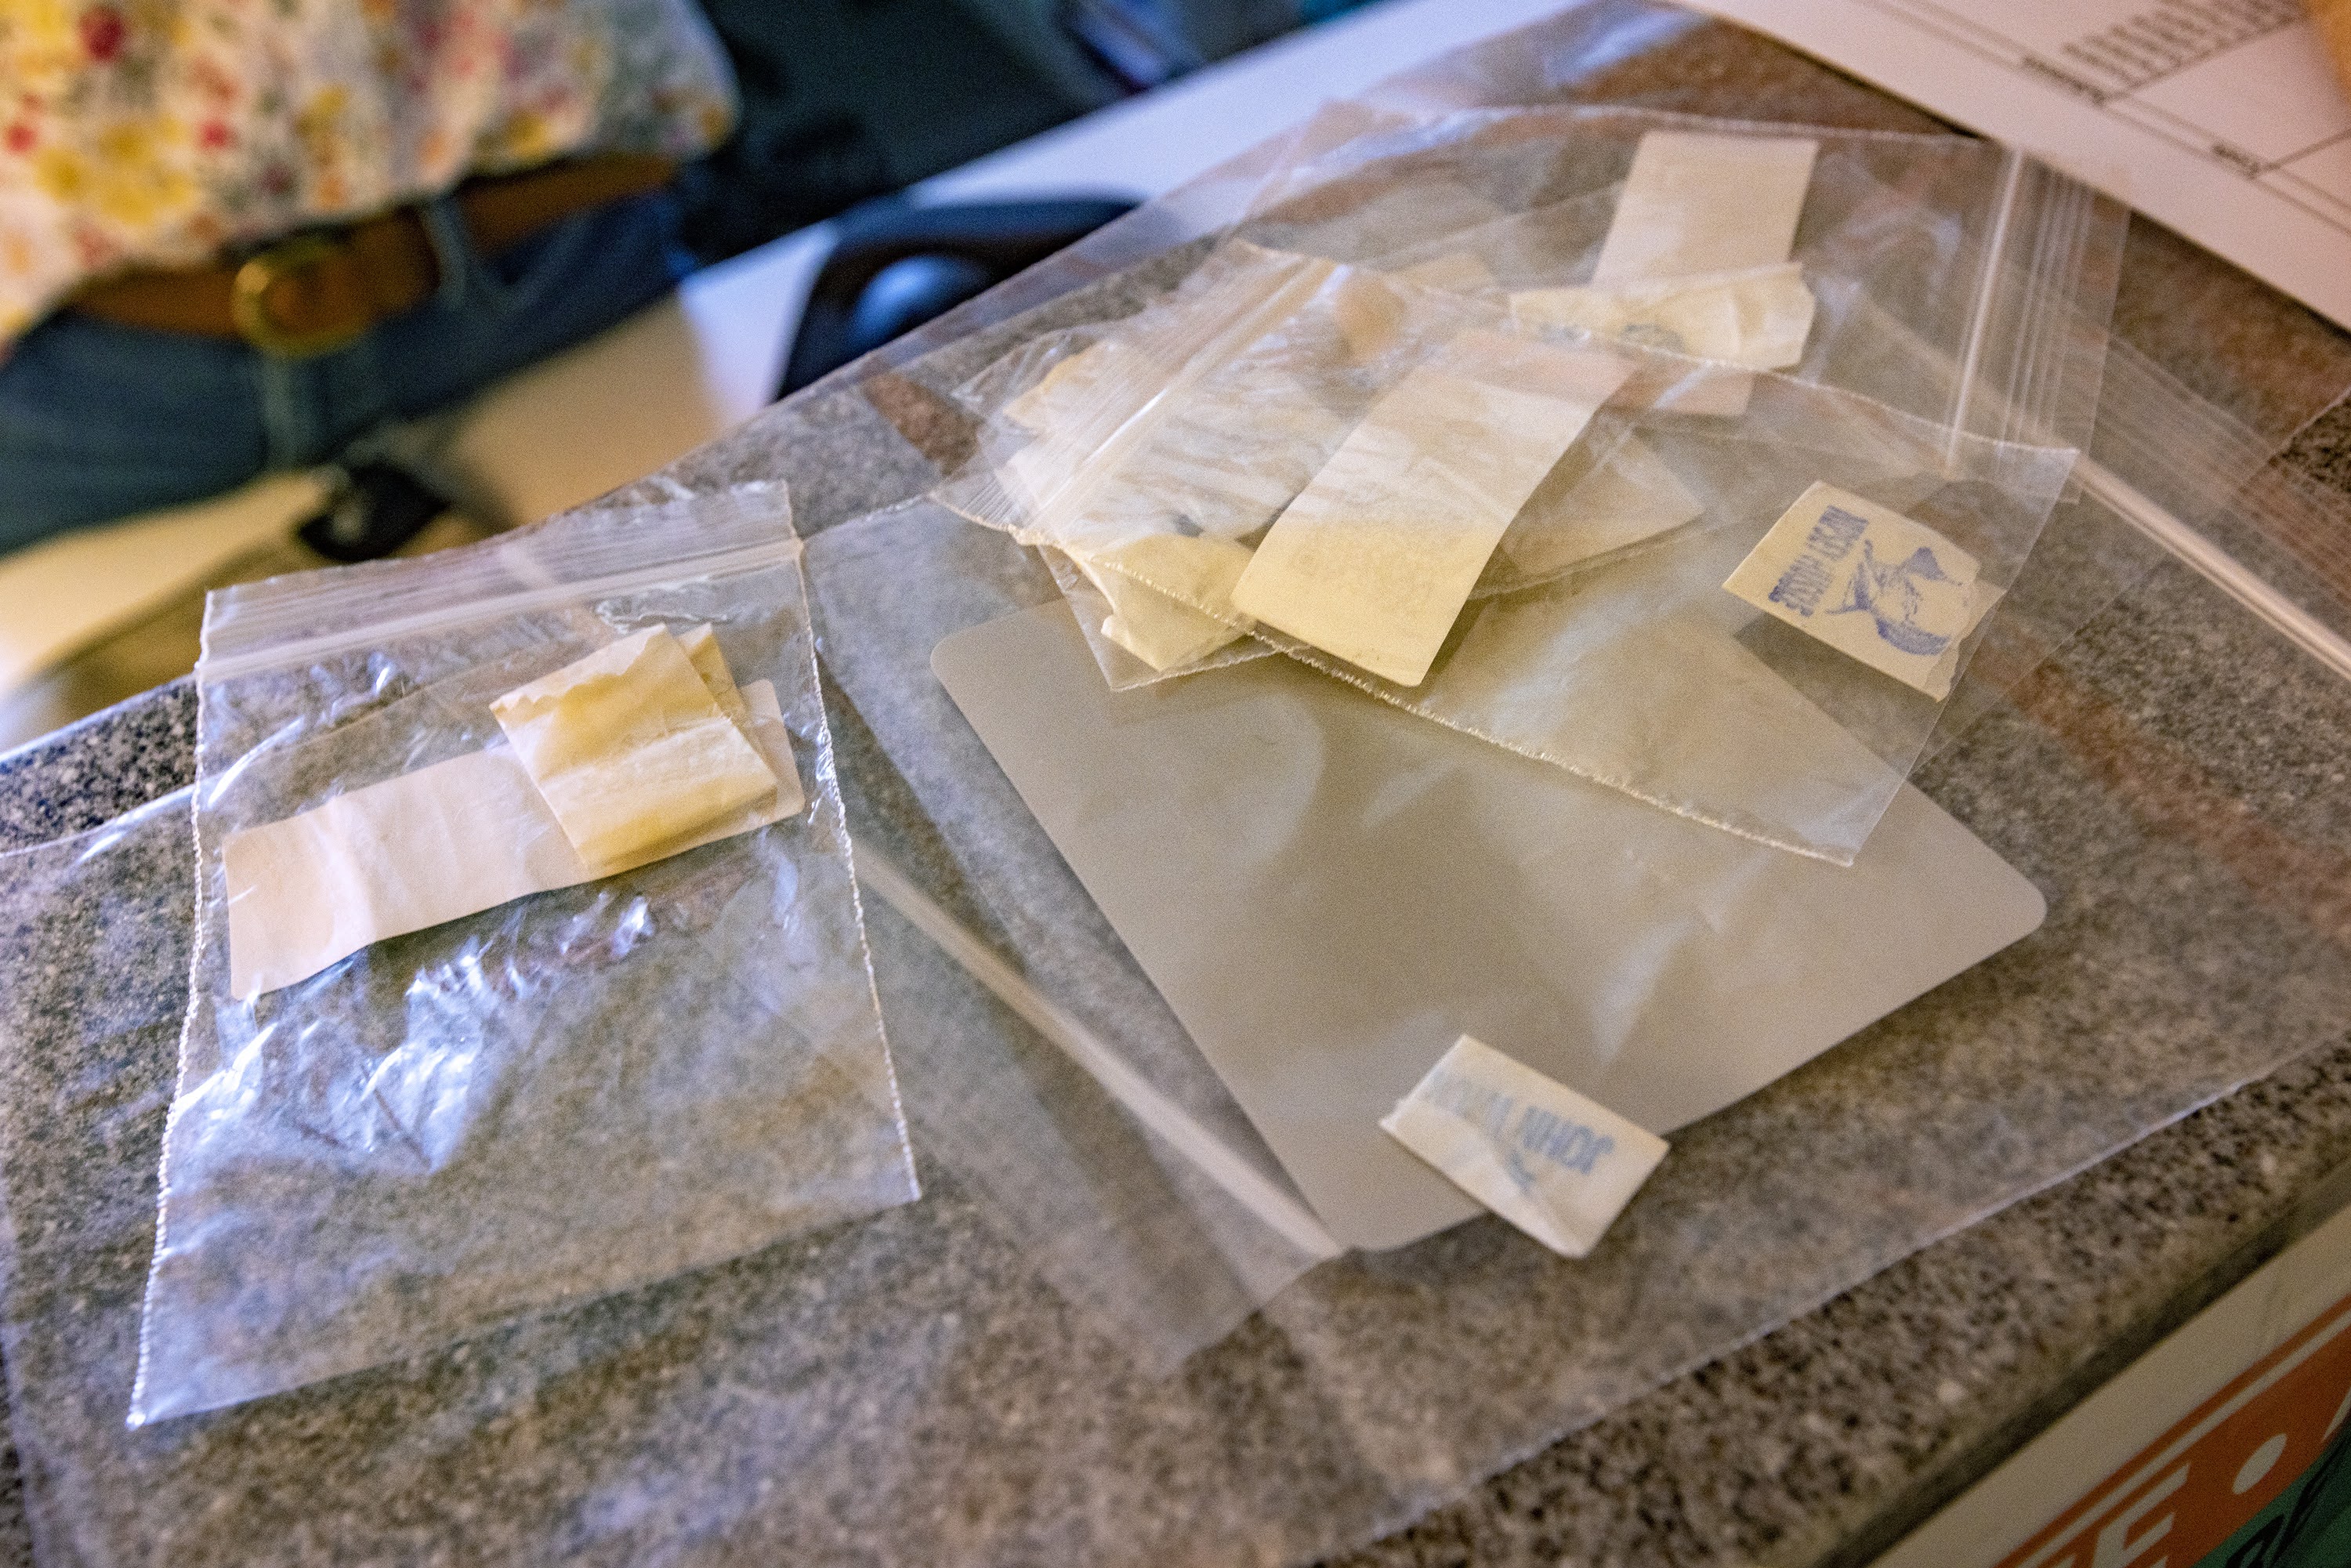 A photo shows samples of illegal drugs in small plastic bags for testing.